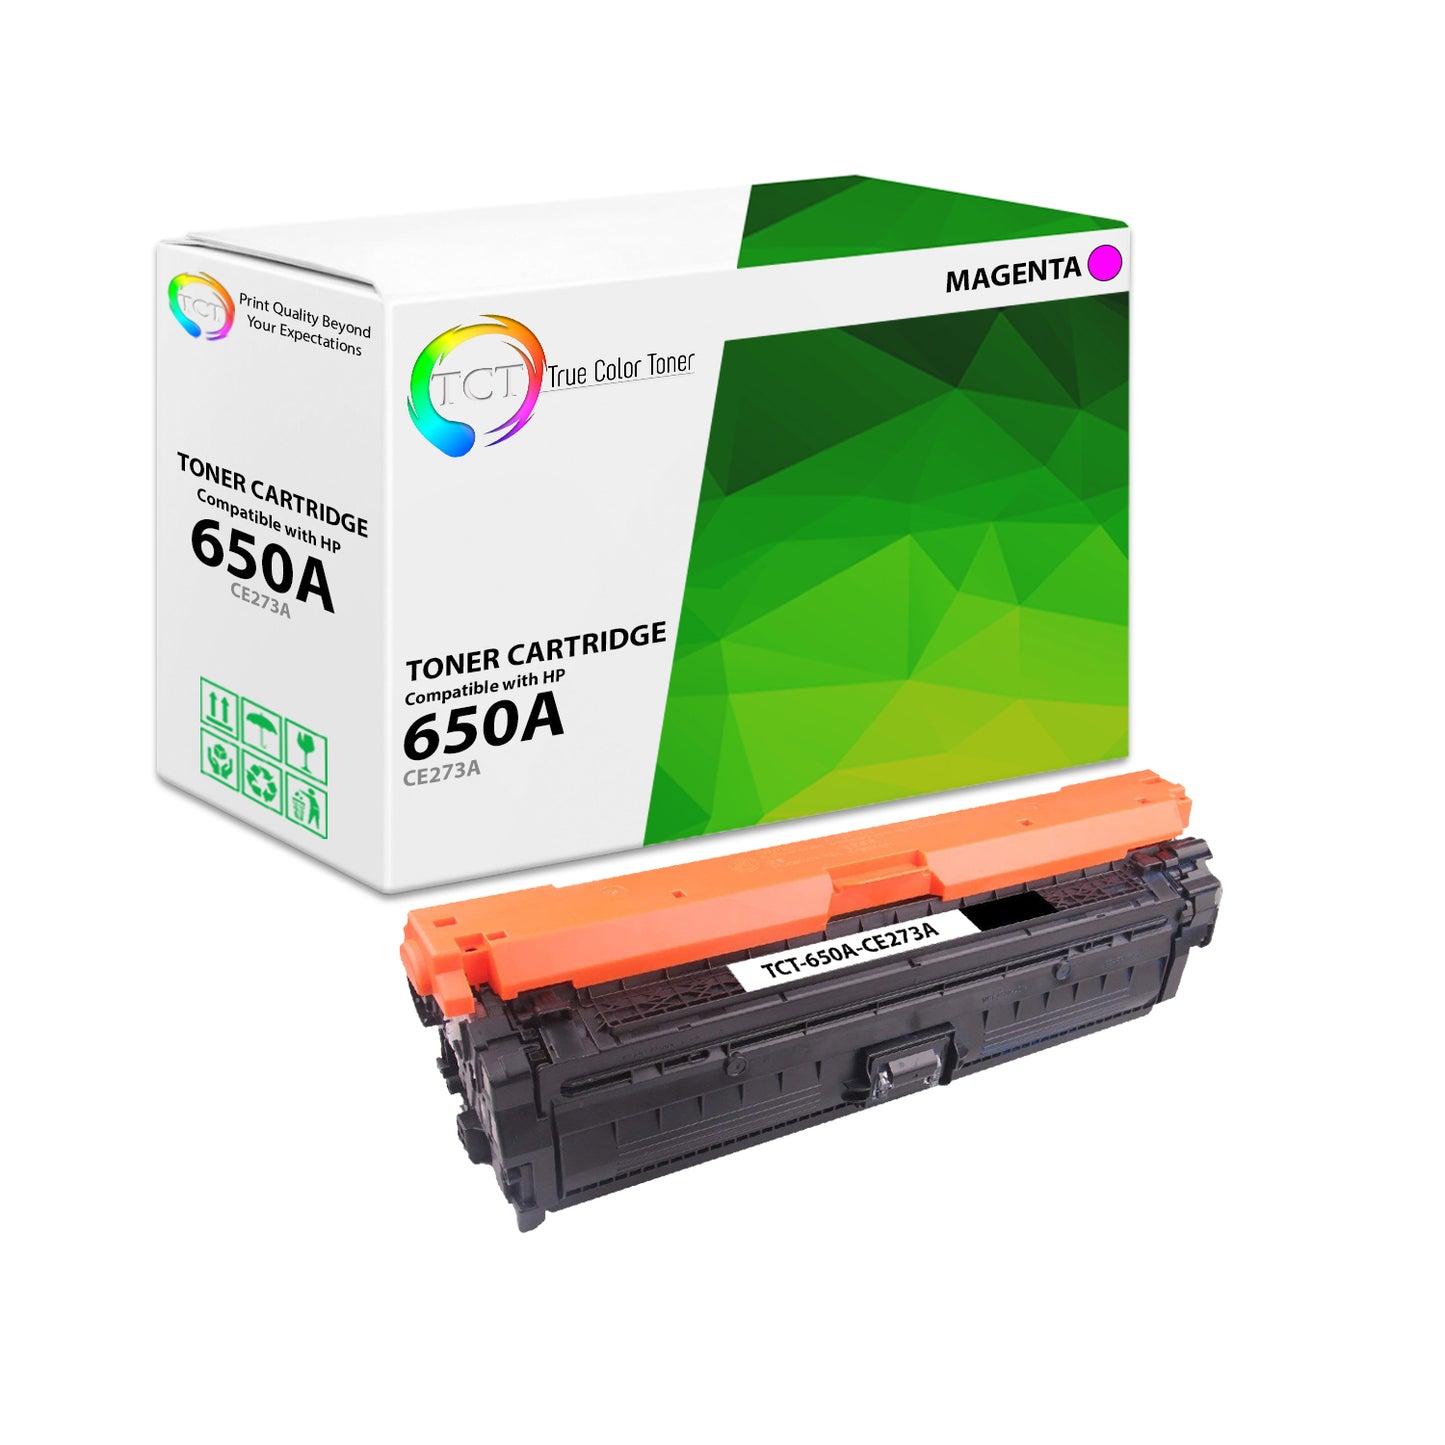 TCT Compatible Toner Cartridge Replacement for the HP 650A Series - 1 Pack Magenta